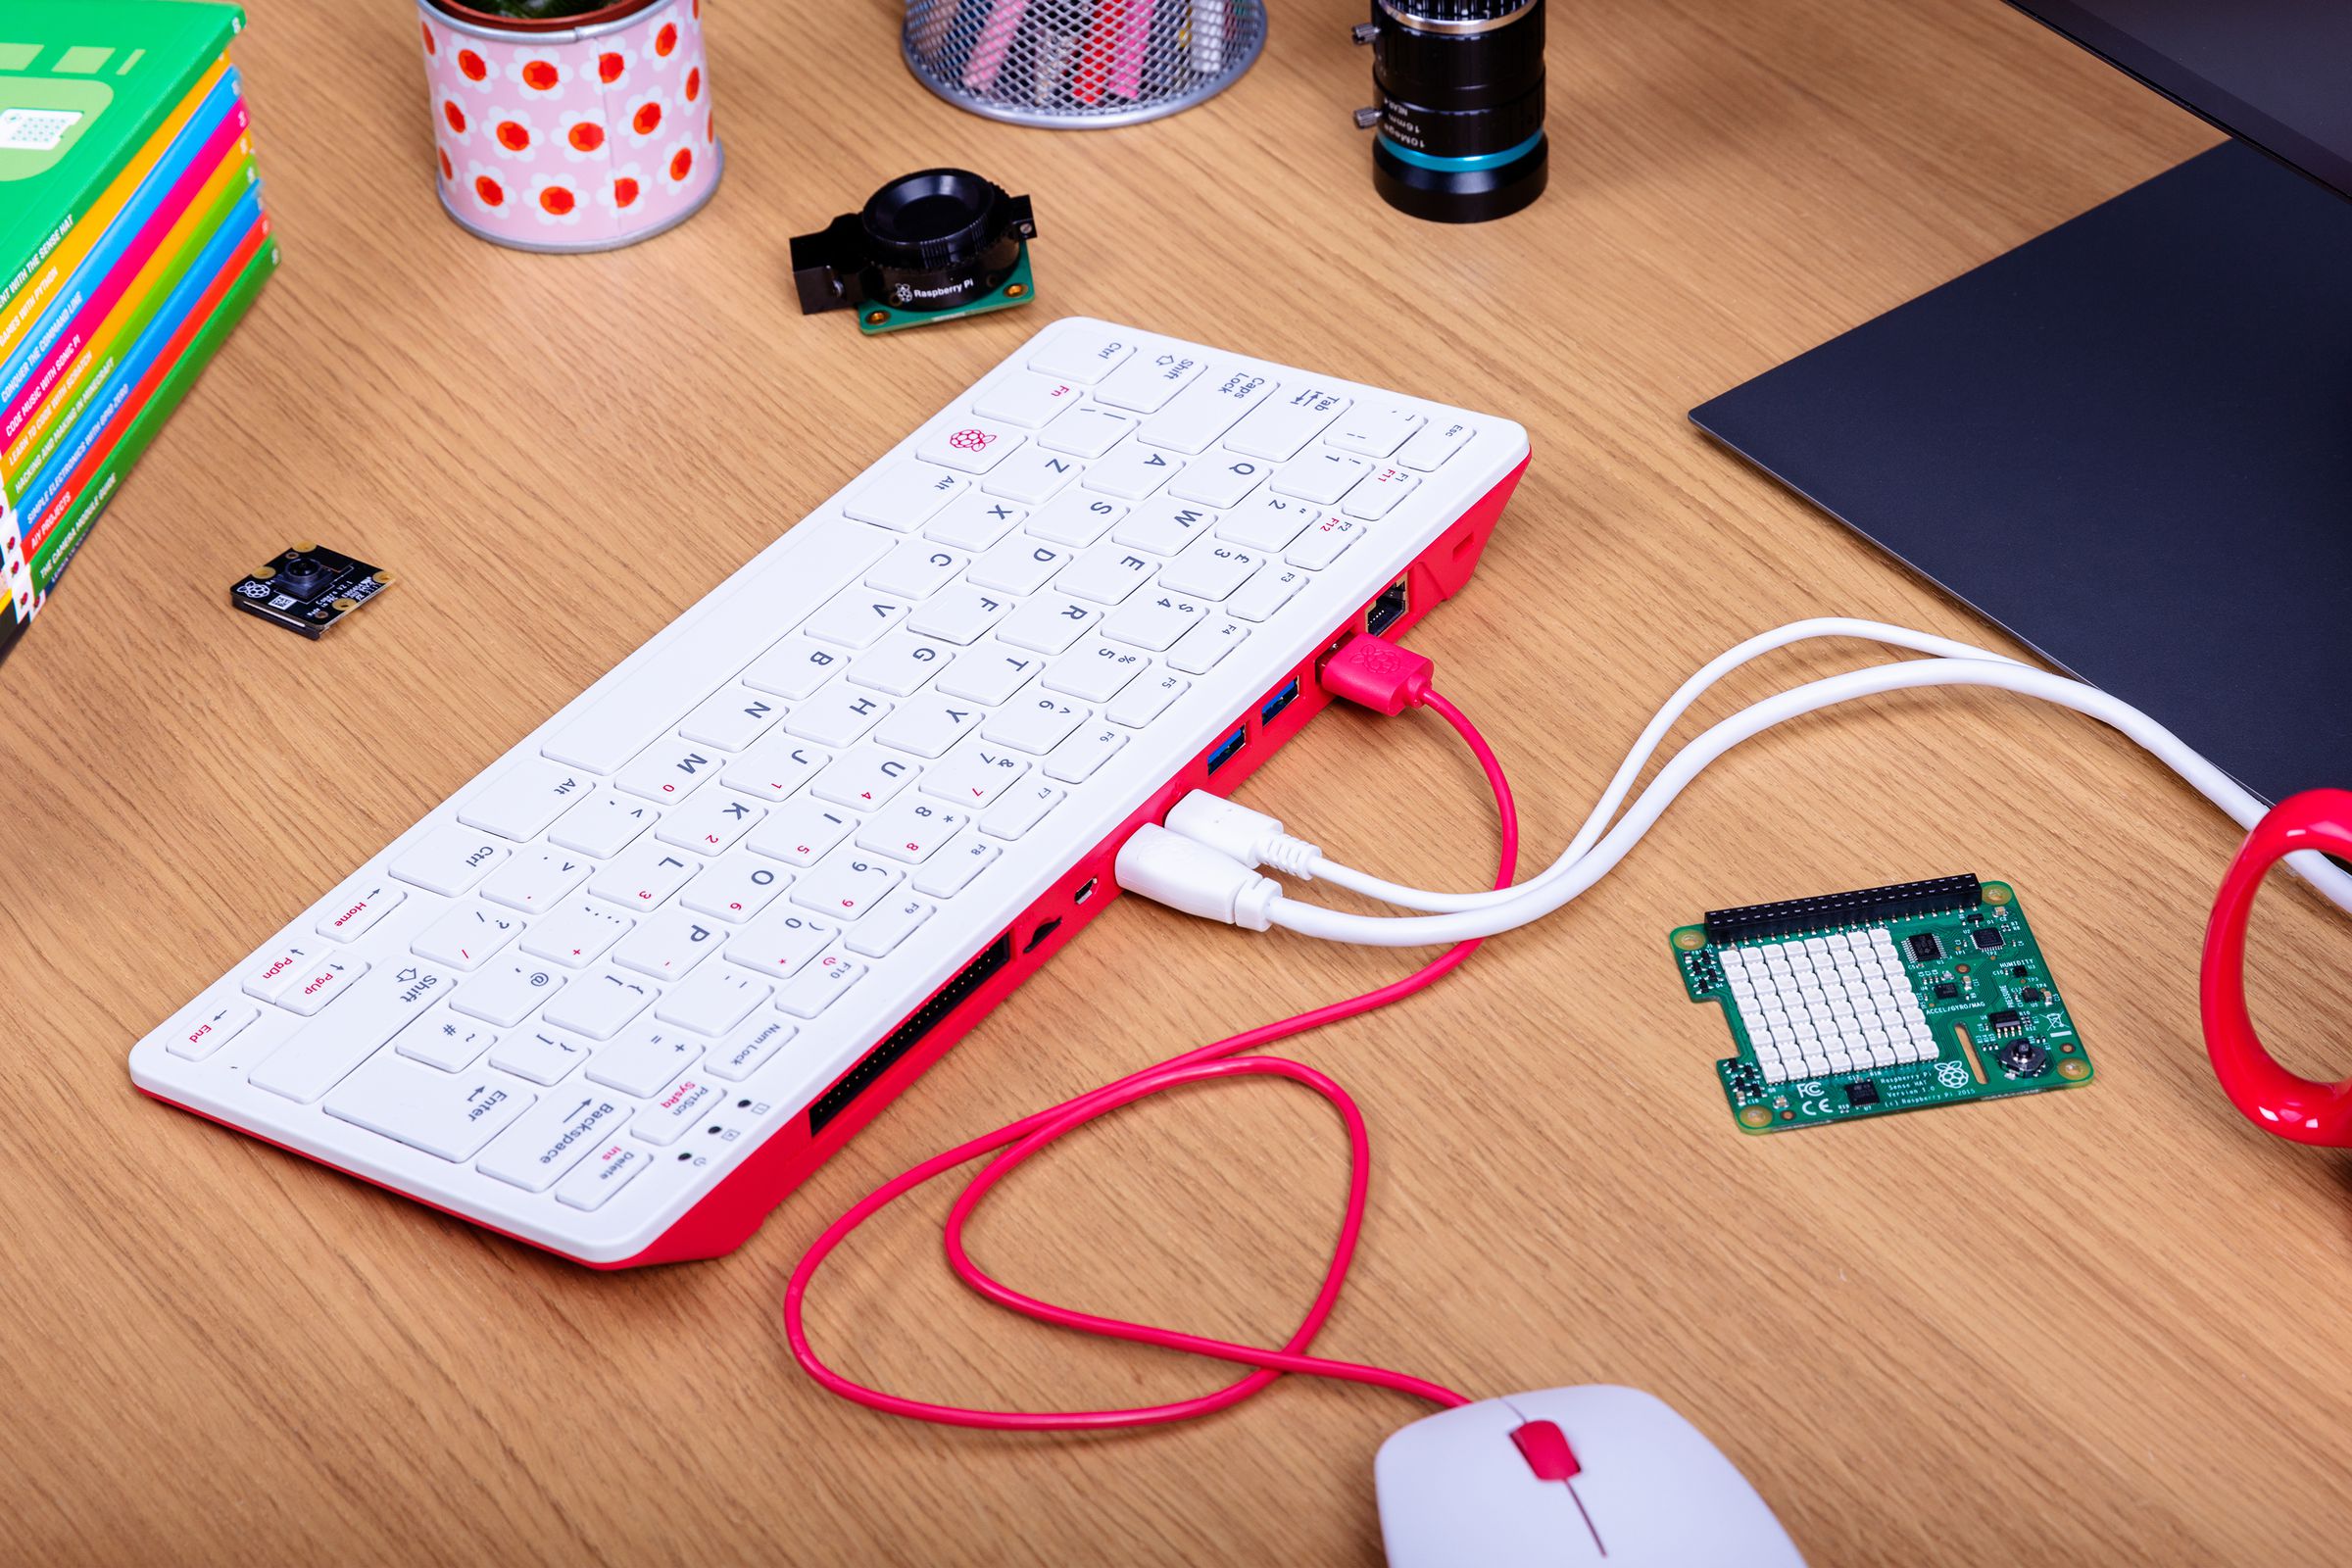 The Raspberry Pi 400 is a self-contained computer built into a keyboard.